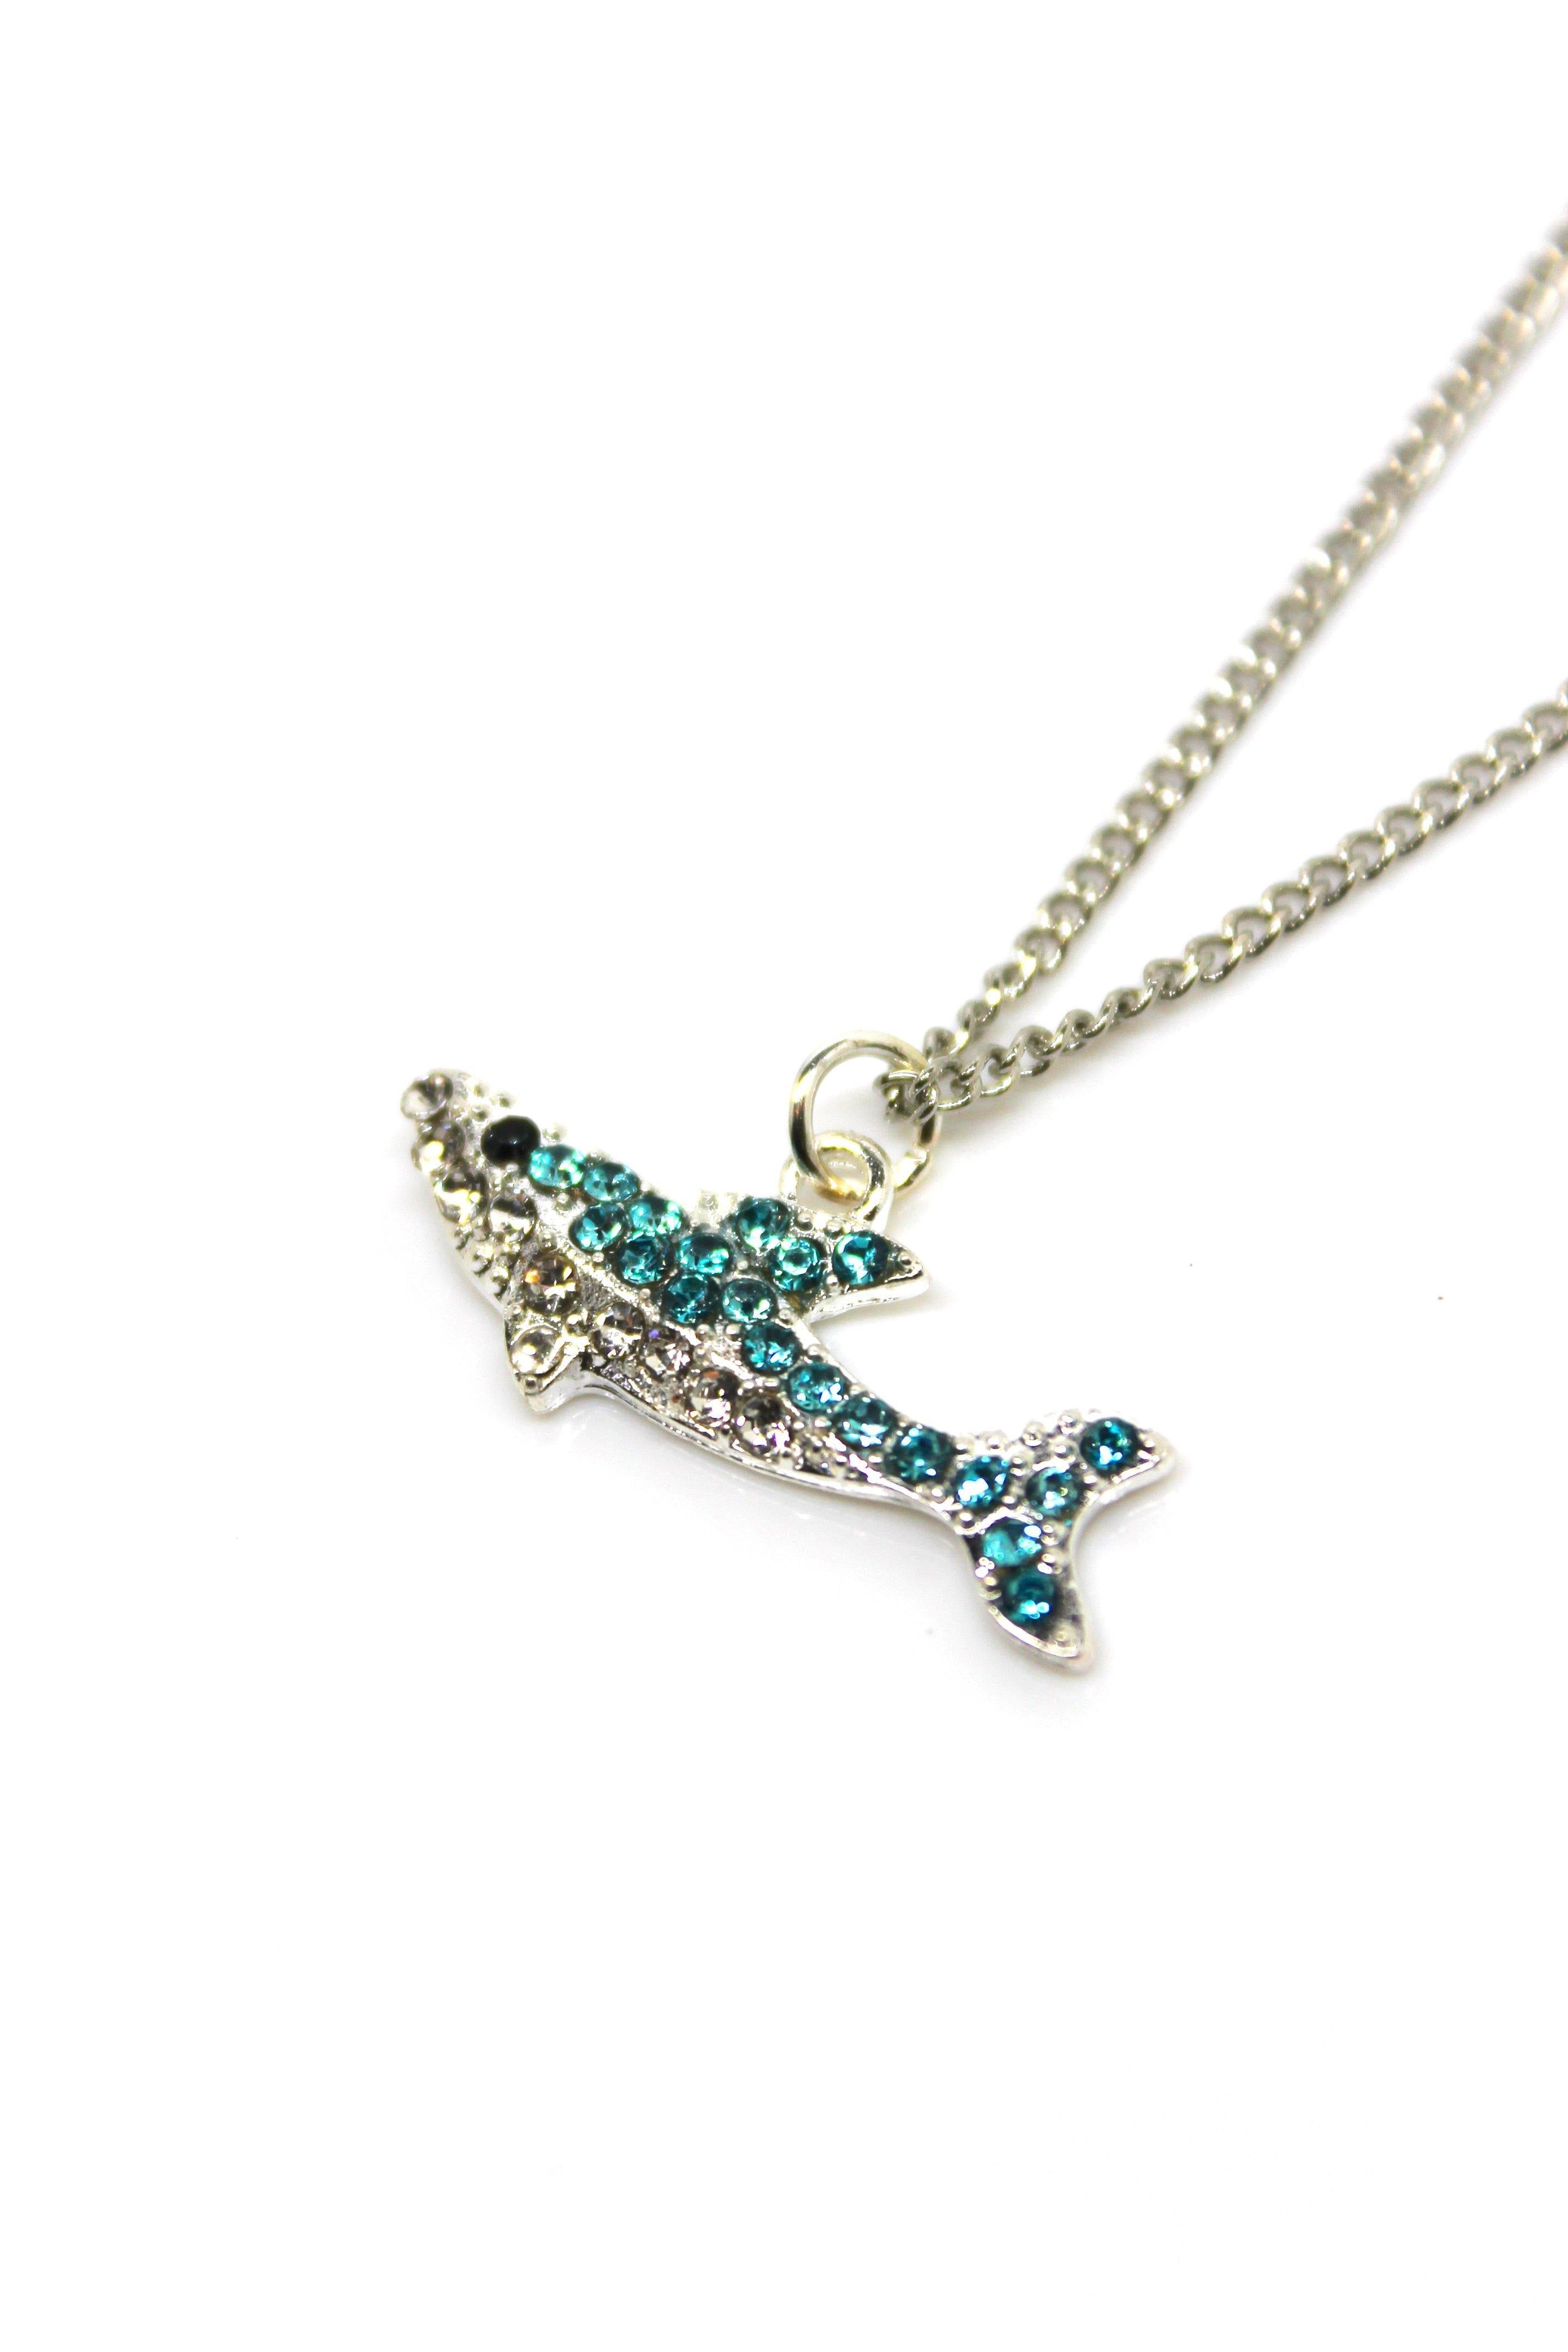 Shark Blue Necklace - Wildtouch - Wildtouch